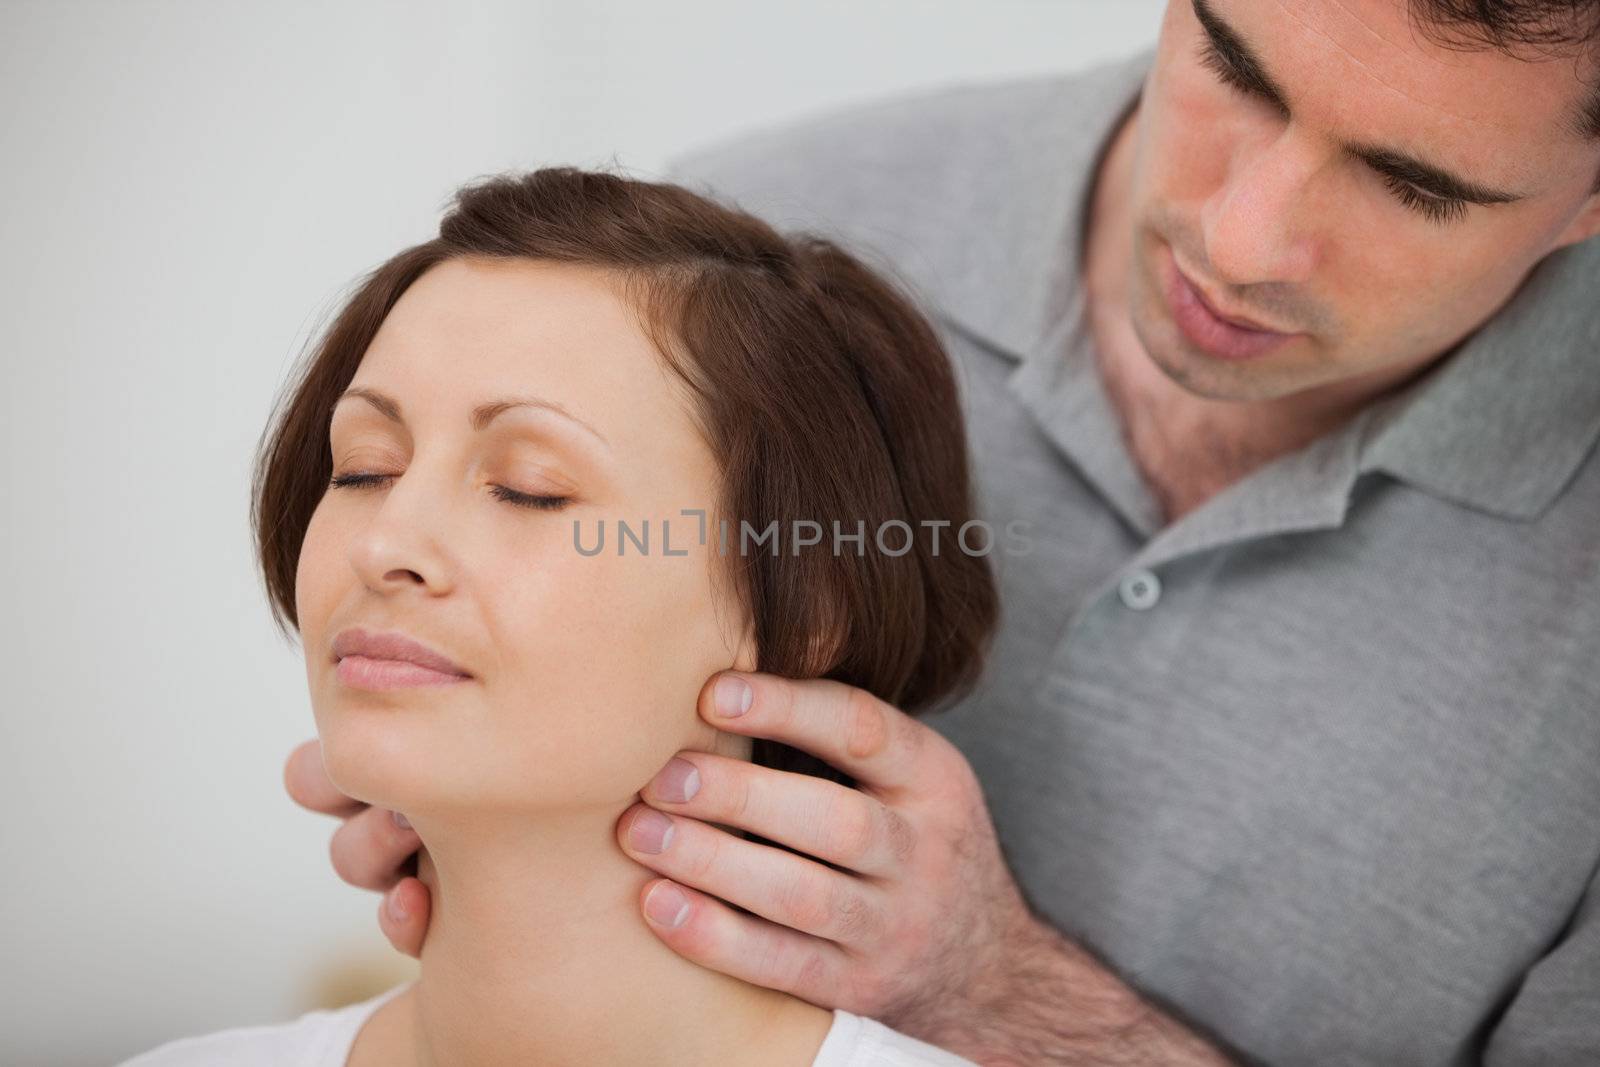 Physiotherapist massaging the neck of a patient in a room